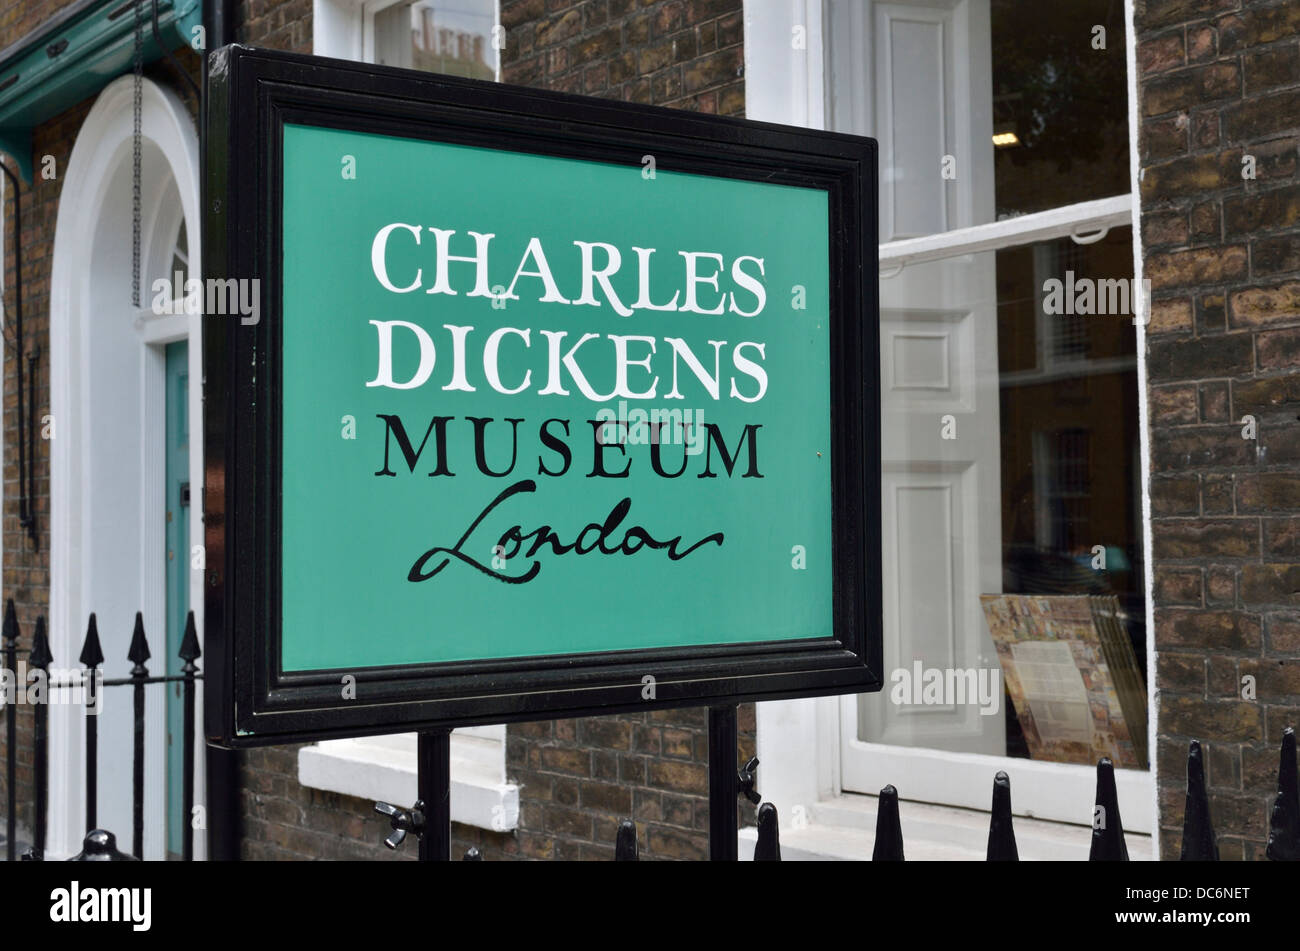 The Charles Dickens Museum in Doughty Street, London, UK Stock Photo